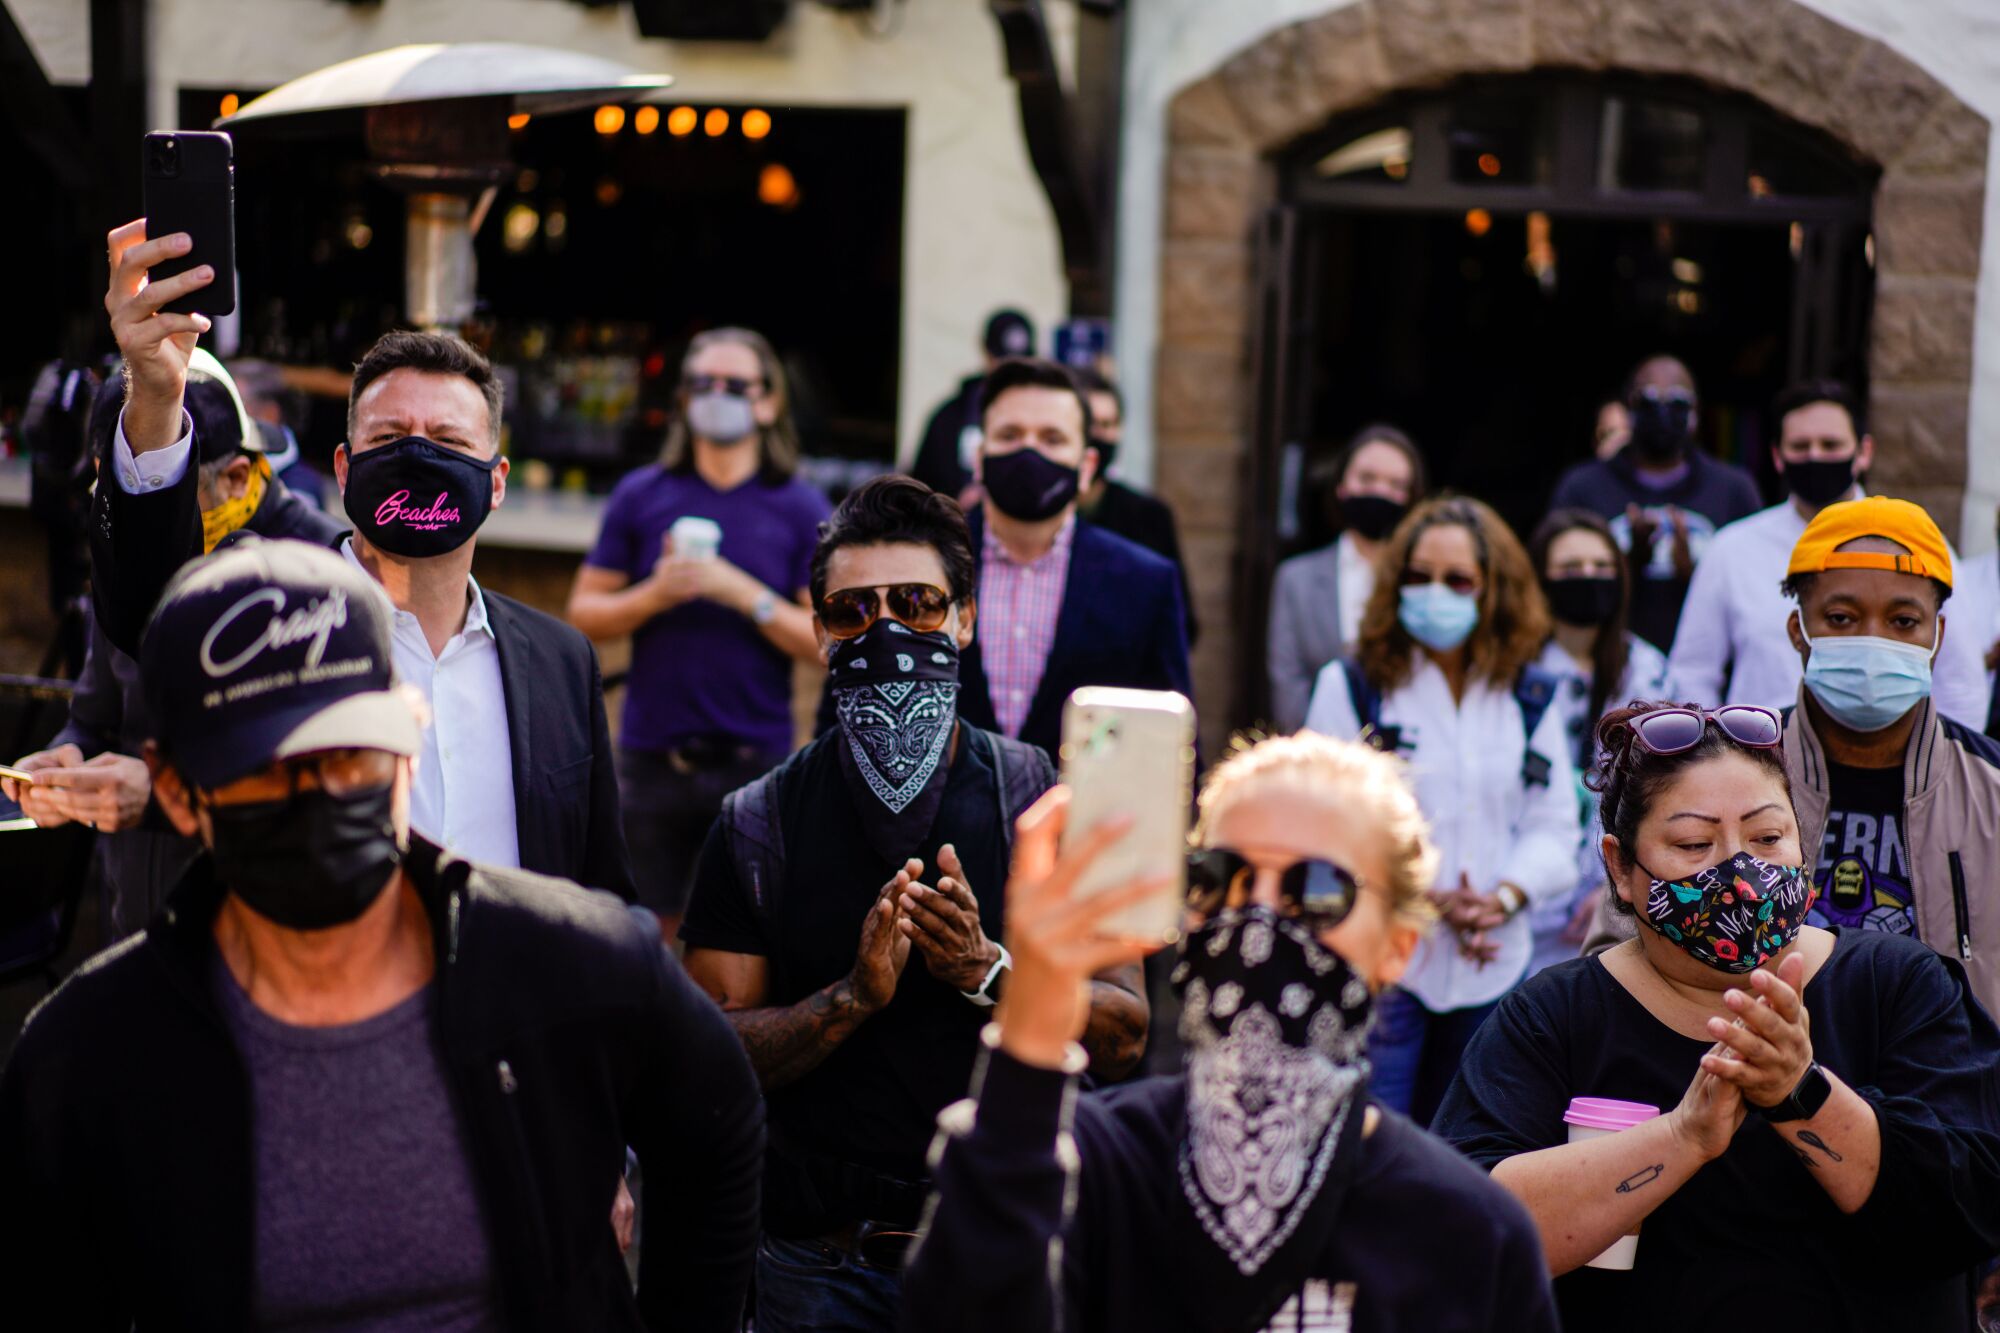 People in bandannas and masks hold up phones and clap at an outdoor news conference.